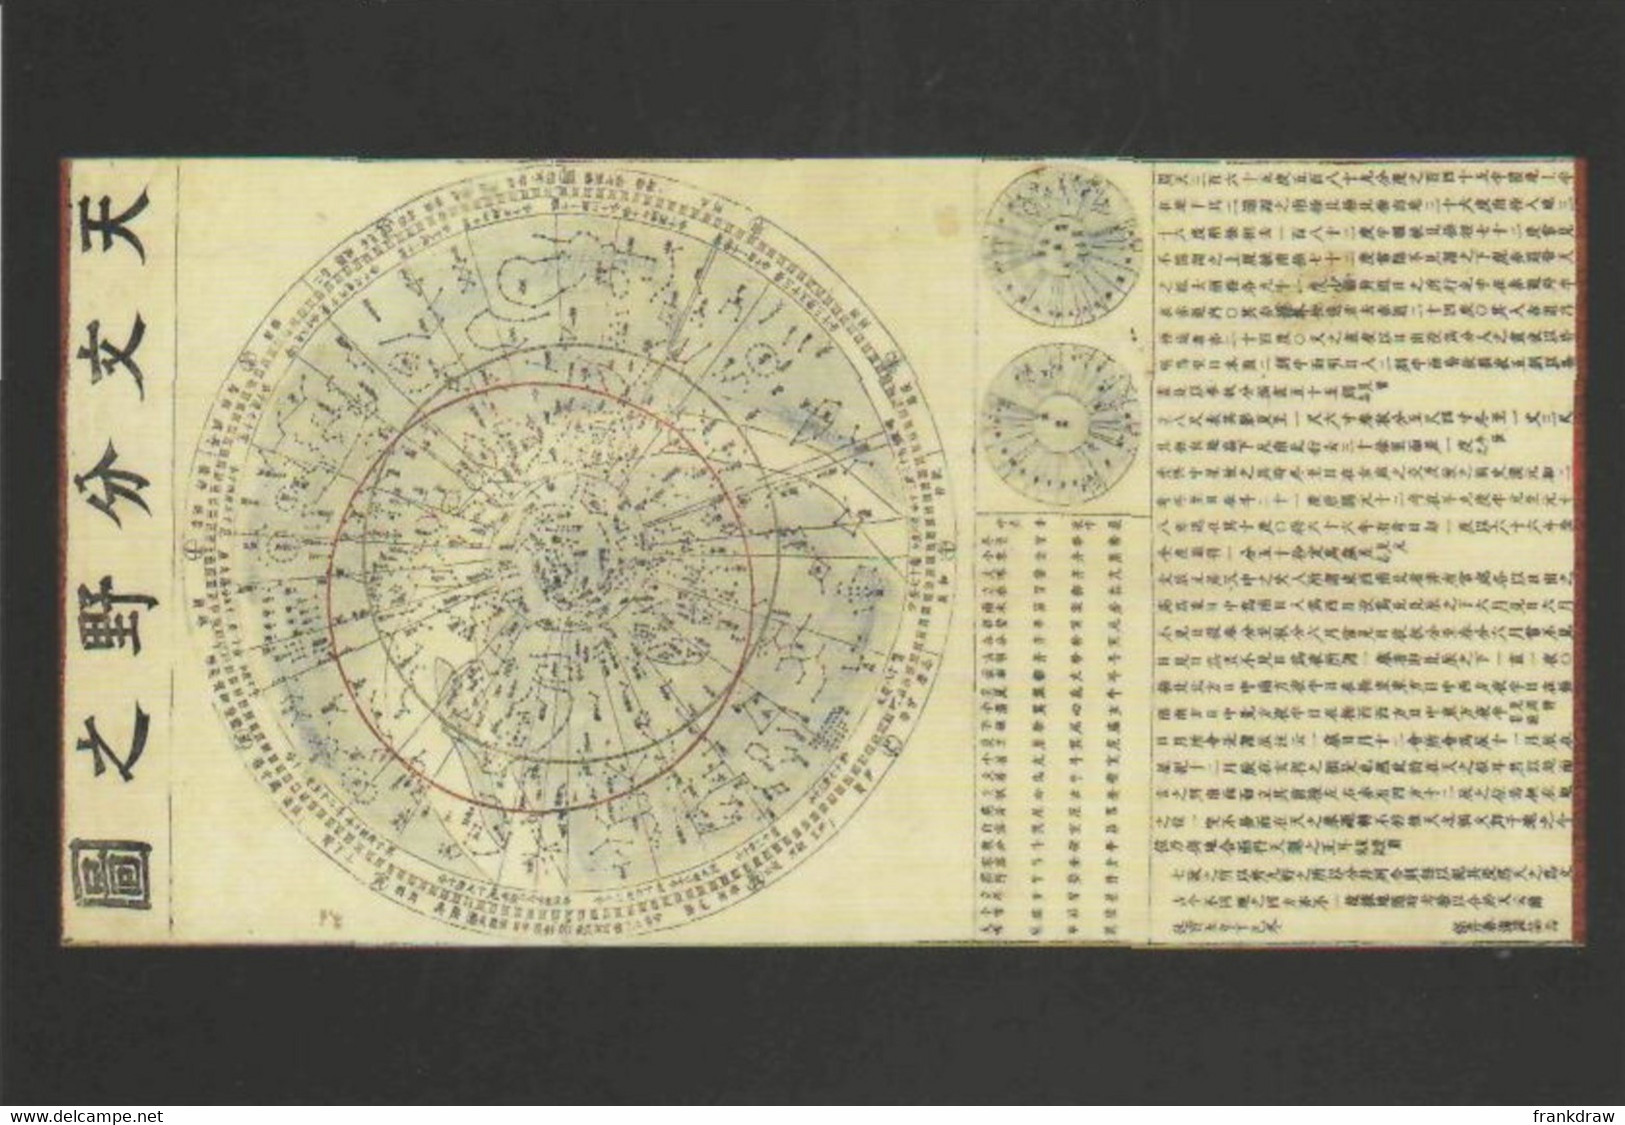 Postcard - The Night Sky - Tenmon Bun'ya No Zu, Map Showing Divisions Of The Heavens - New - Astronomy